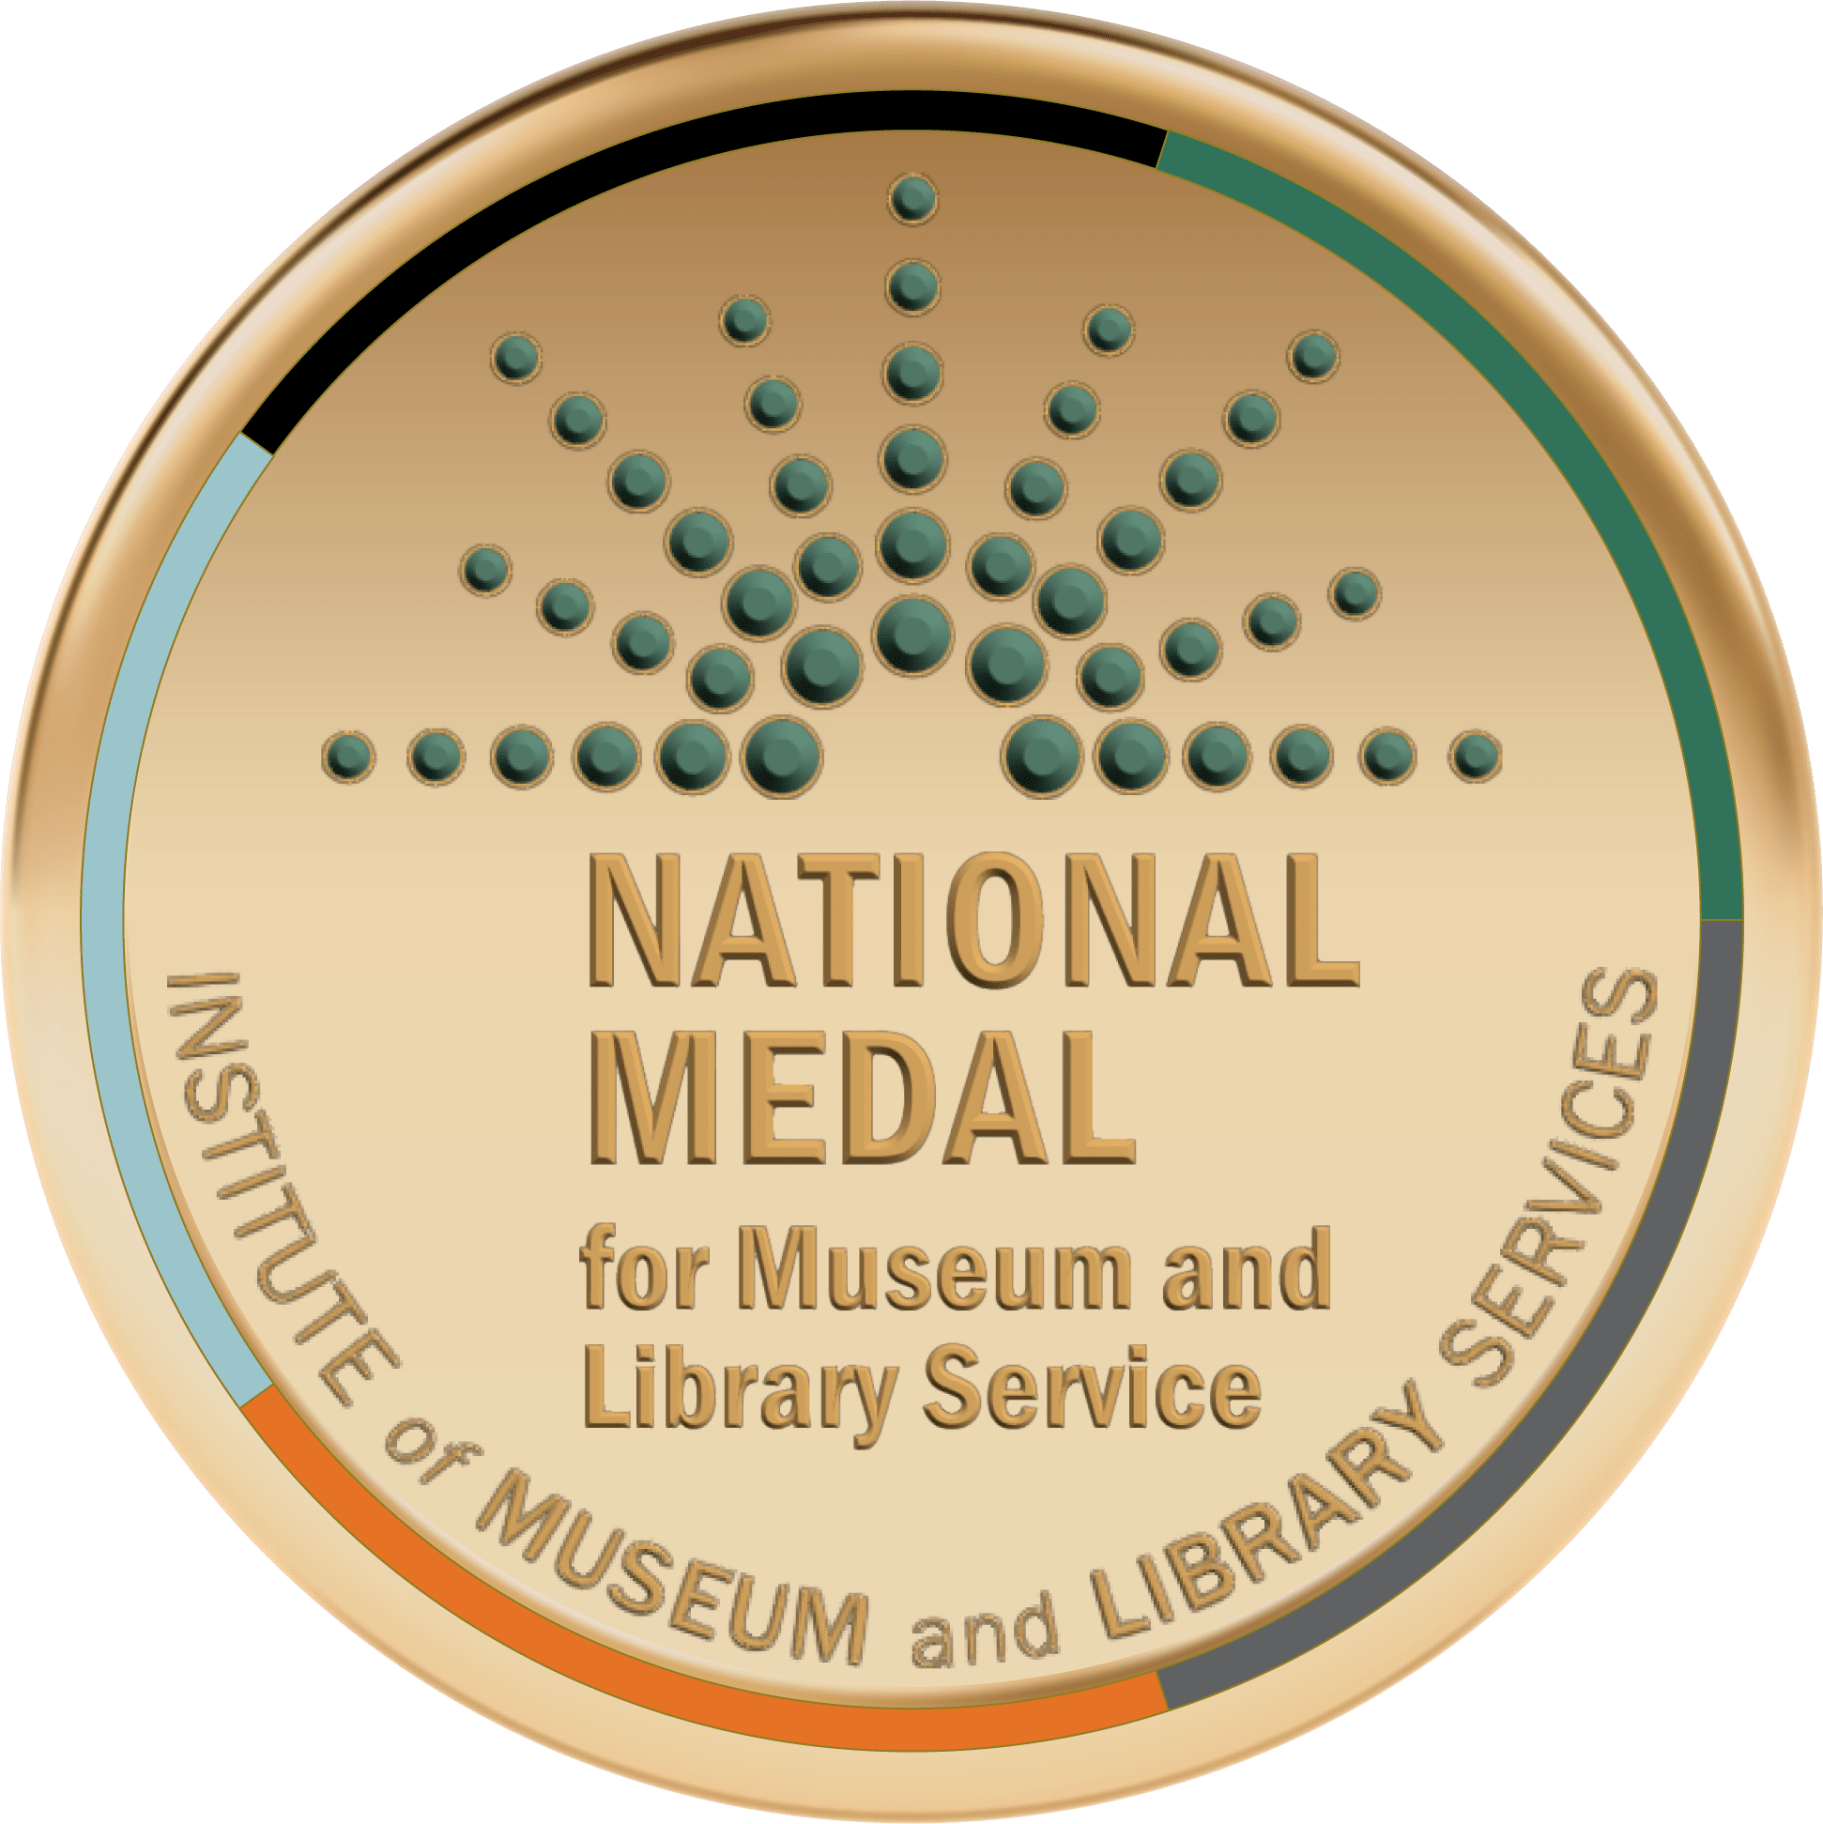 IMLS National Medal for Museum and Library Service